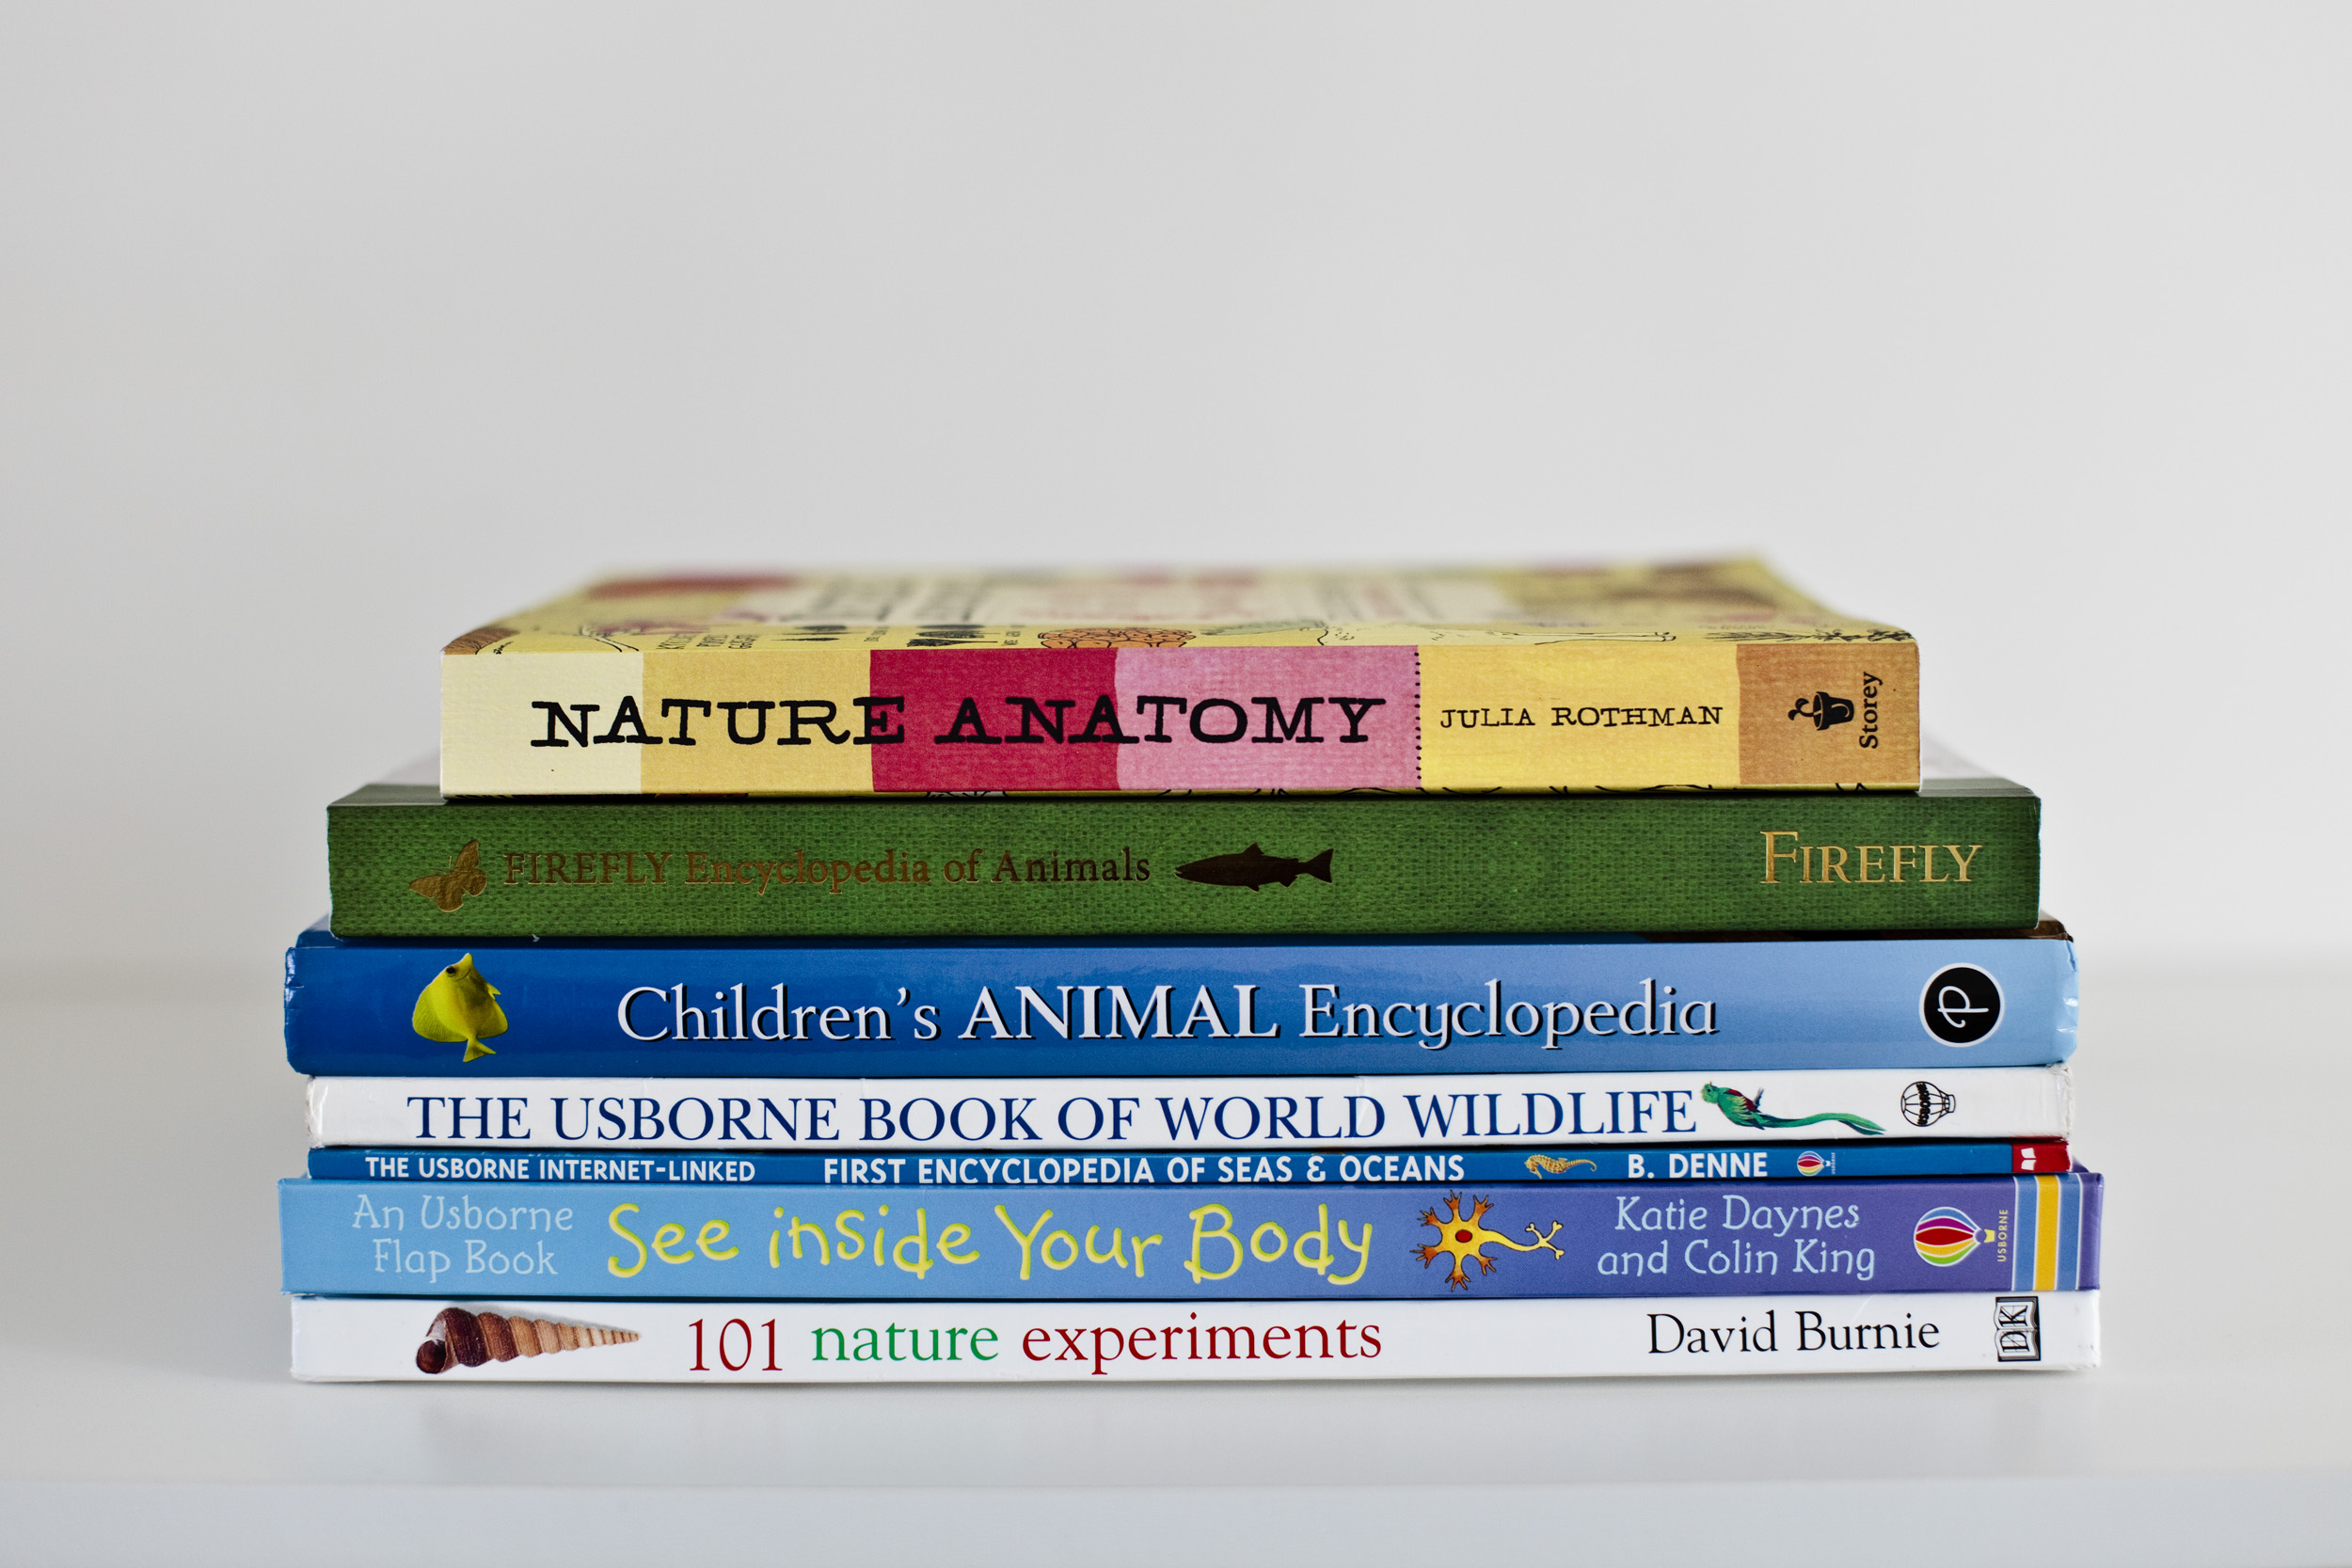 Our practically free homeschool grade one science curriculum and book list!